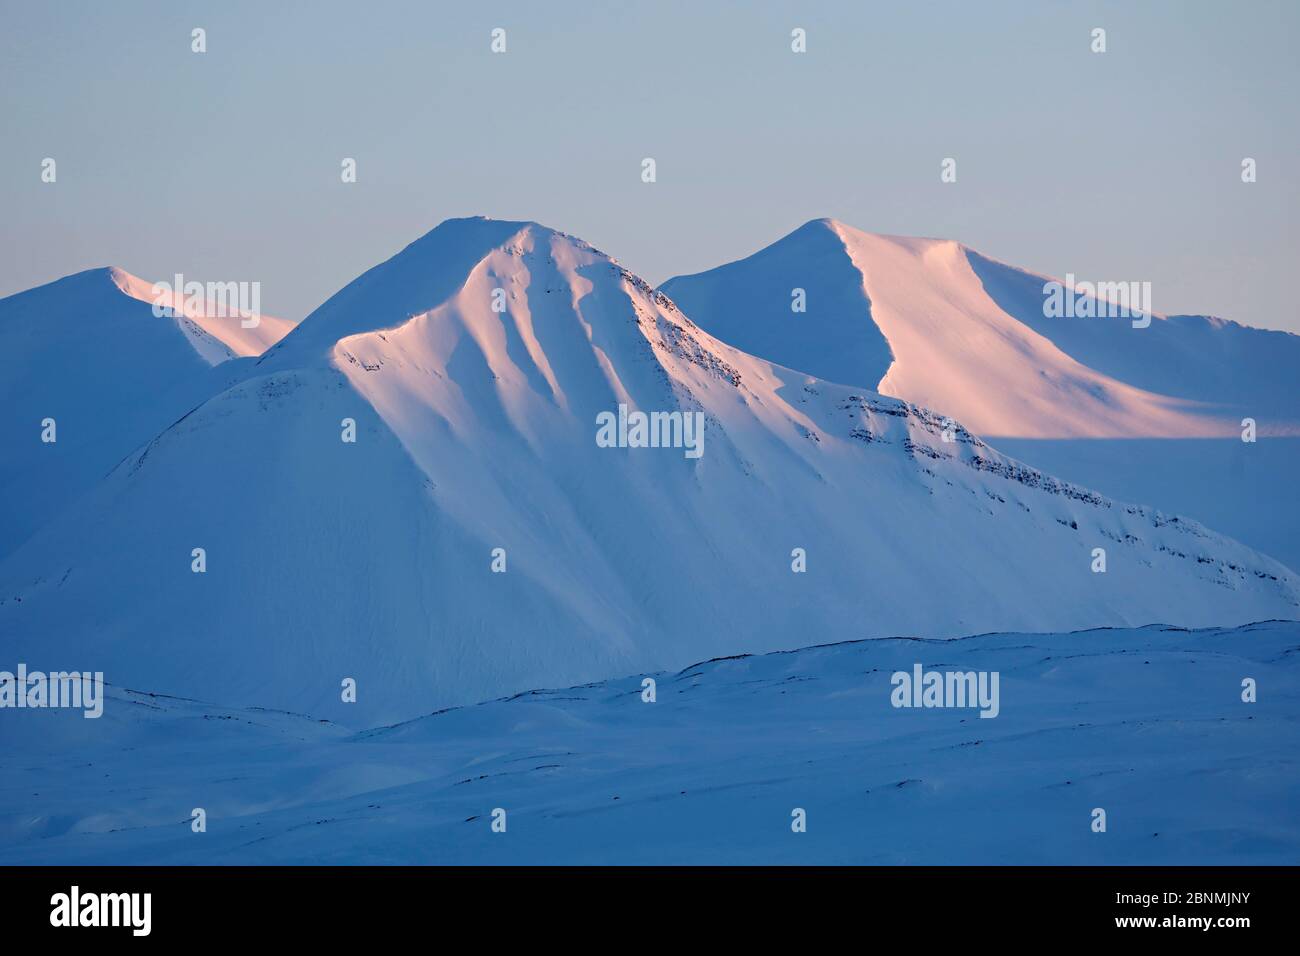 Mountains in Winter at sunset, Spitsbergen, Svalbard, Norway, April Stock Photo